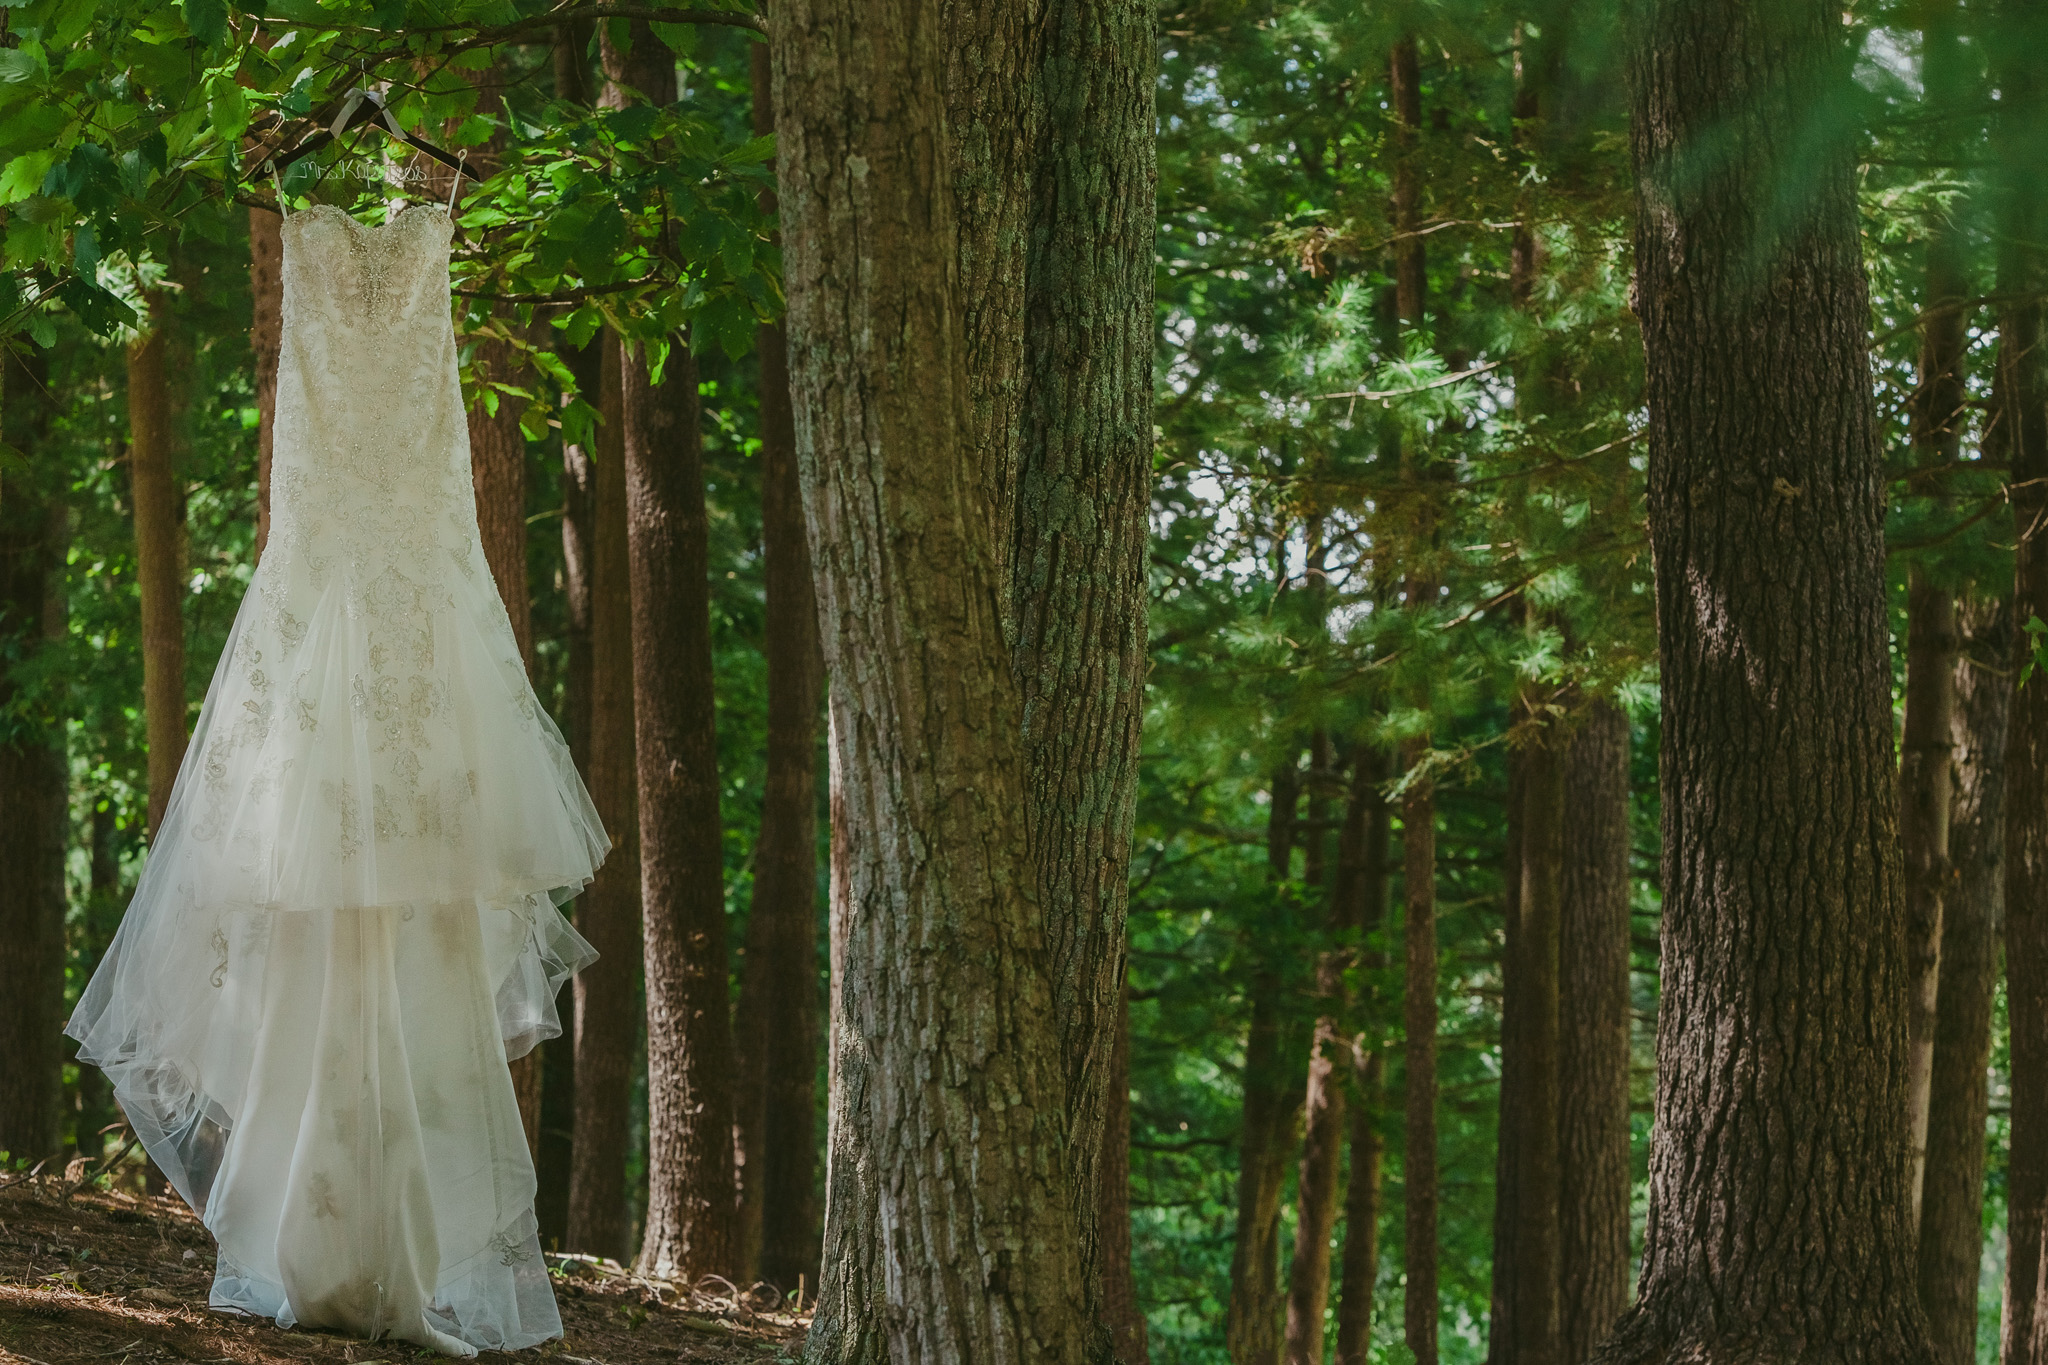 Wedding dress in the forest near Asheville, NC